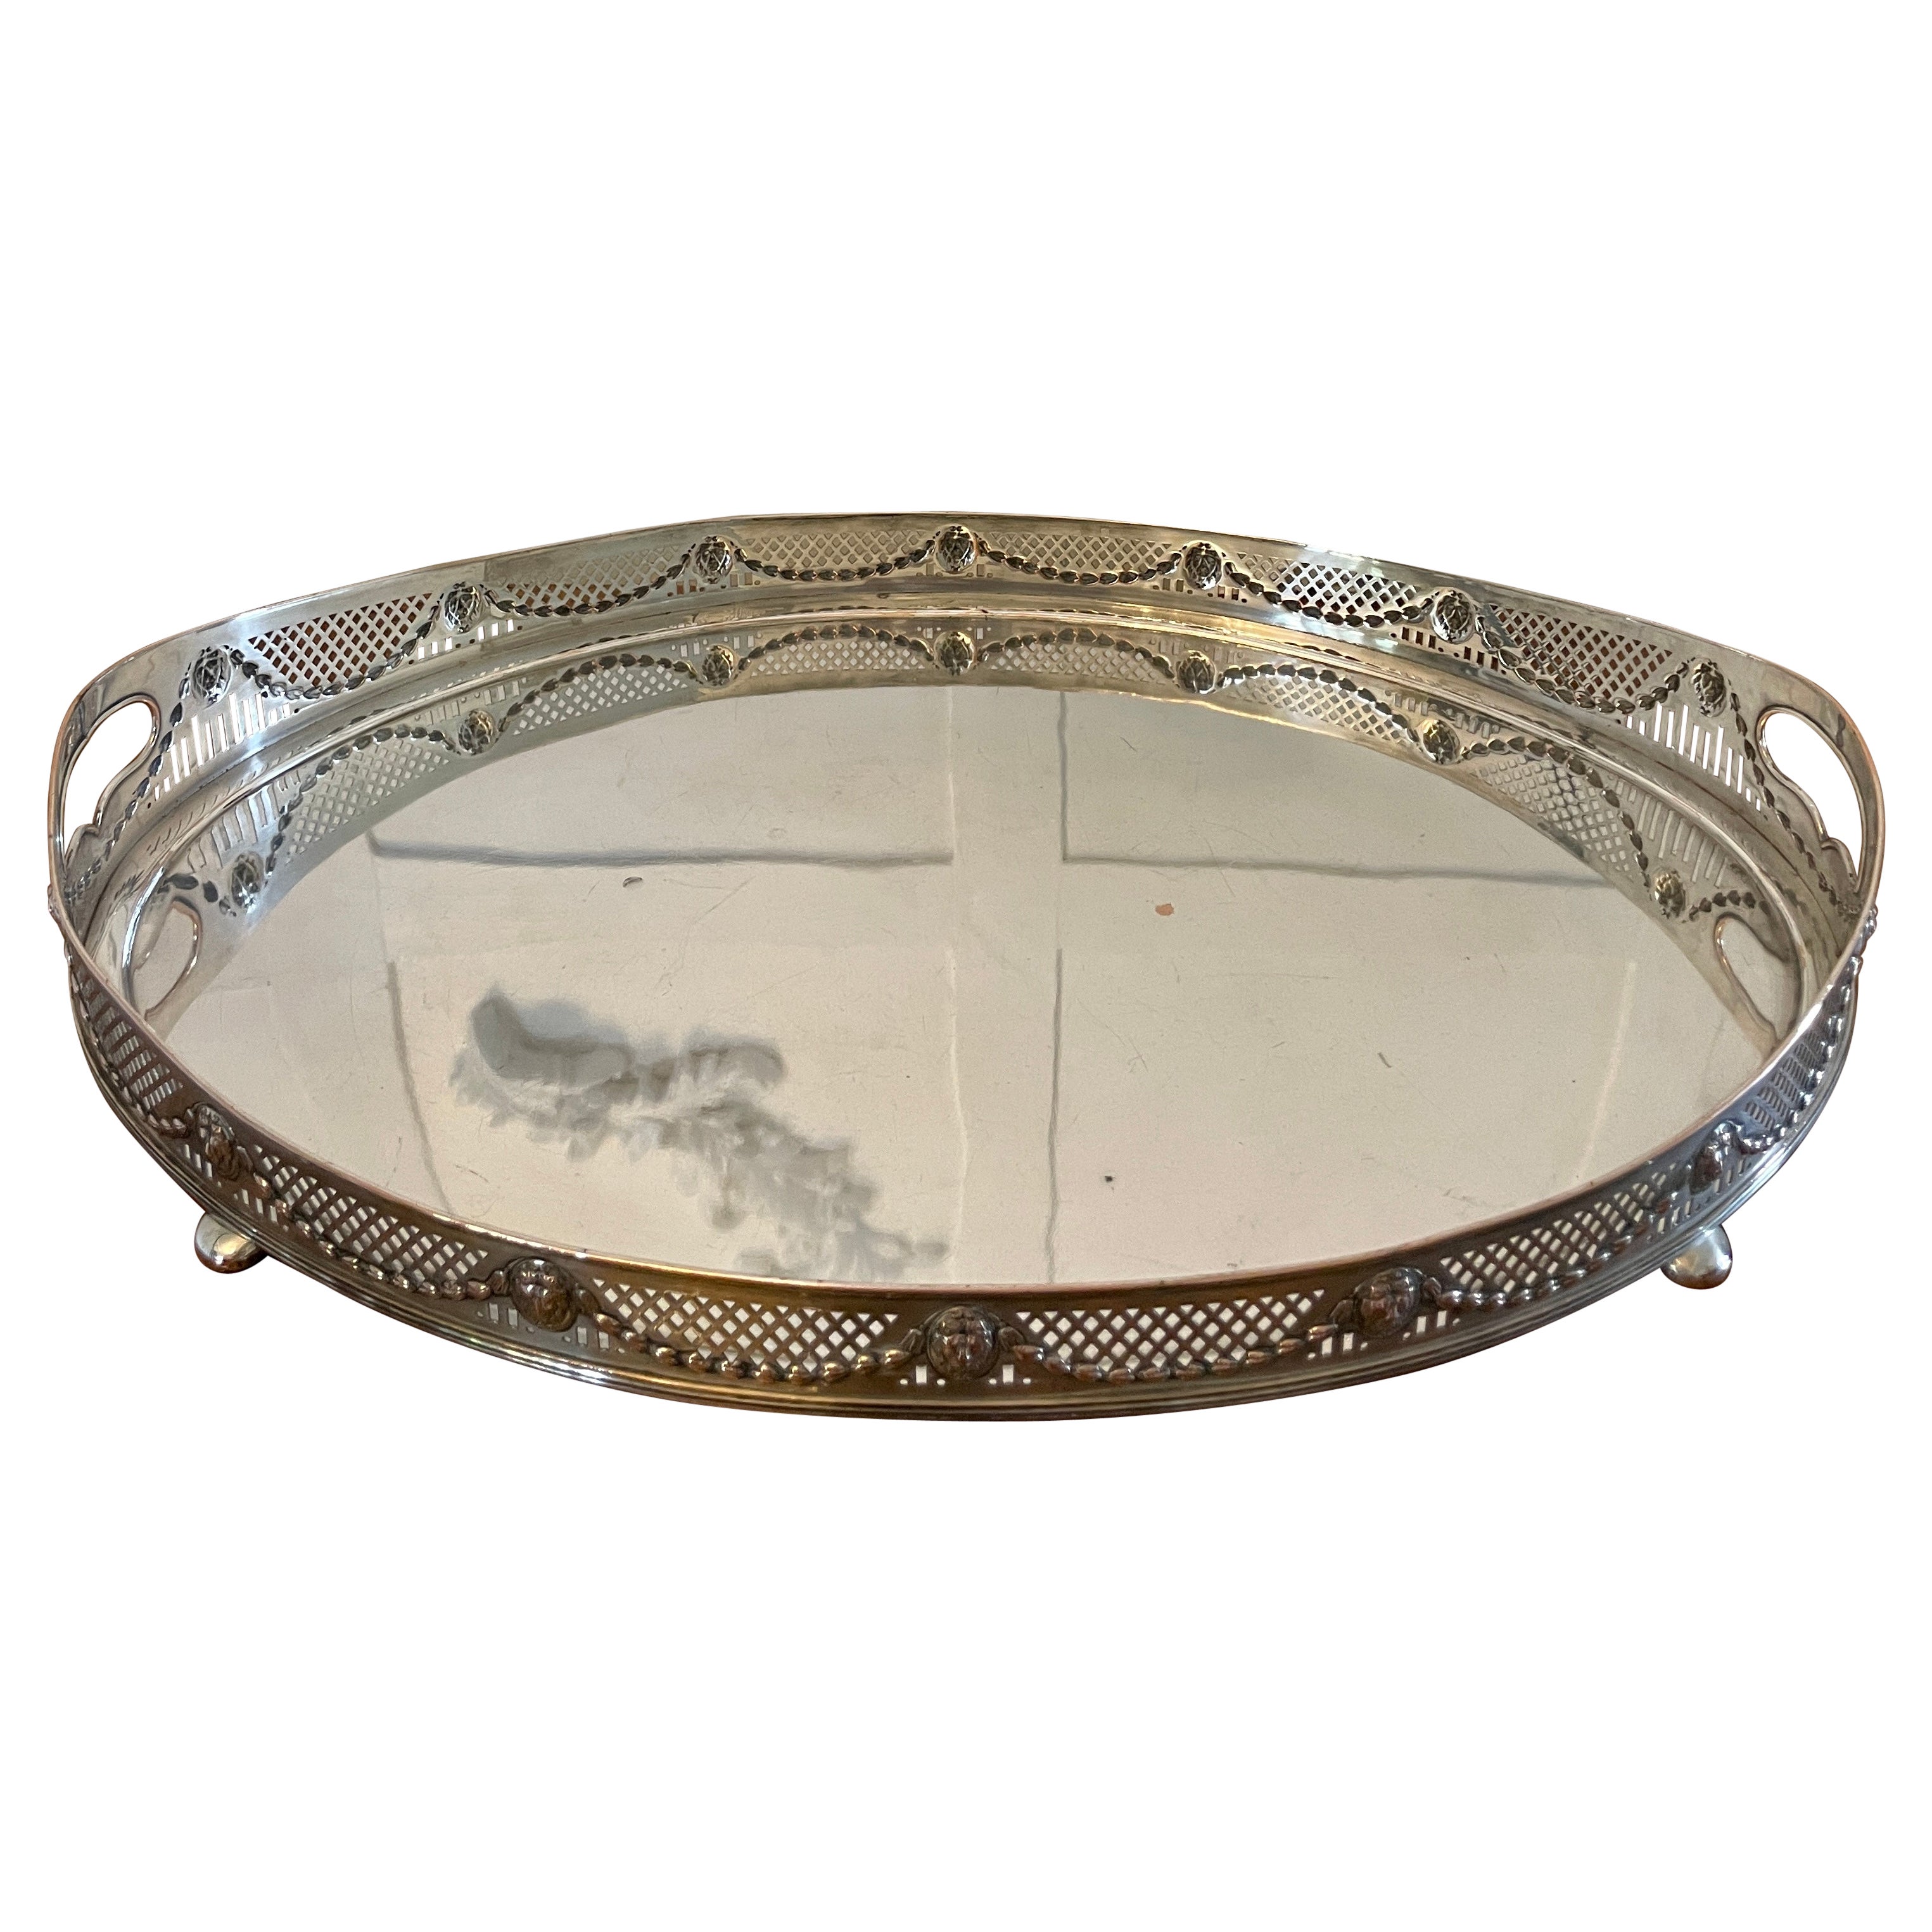  Large Antique Edwardian Quality Silver Plated Oval Shaped Tea Tray 